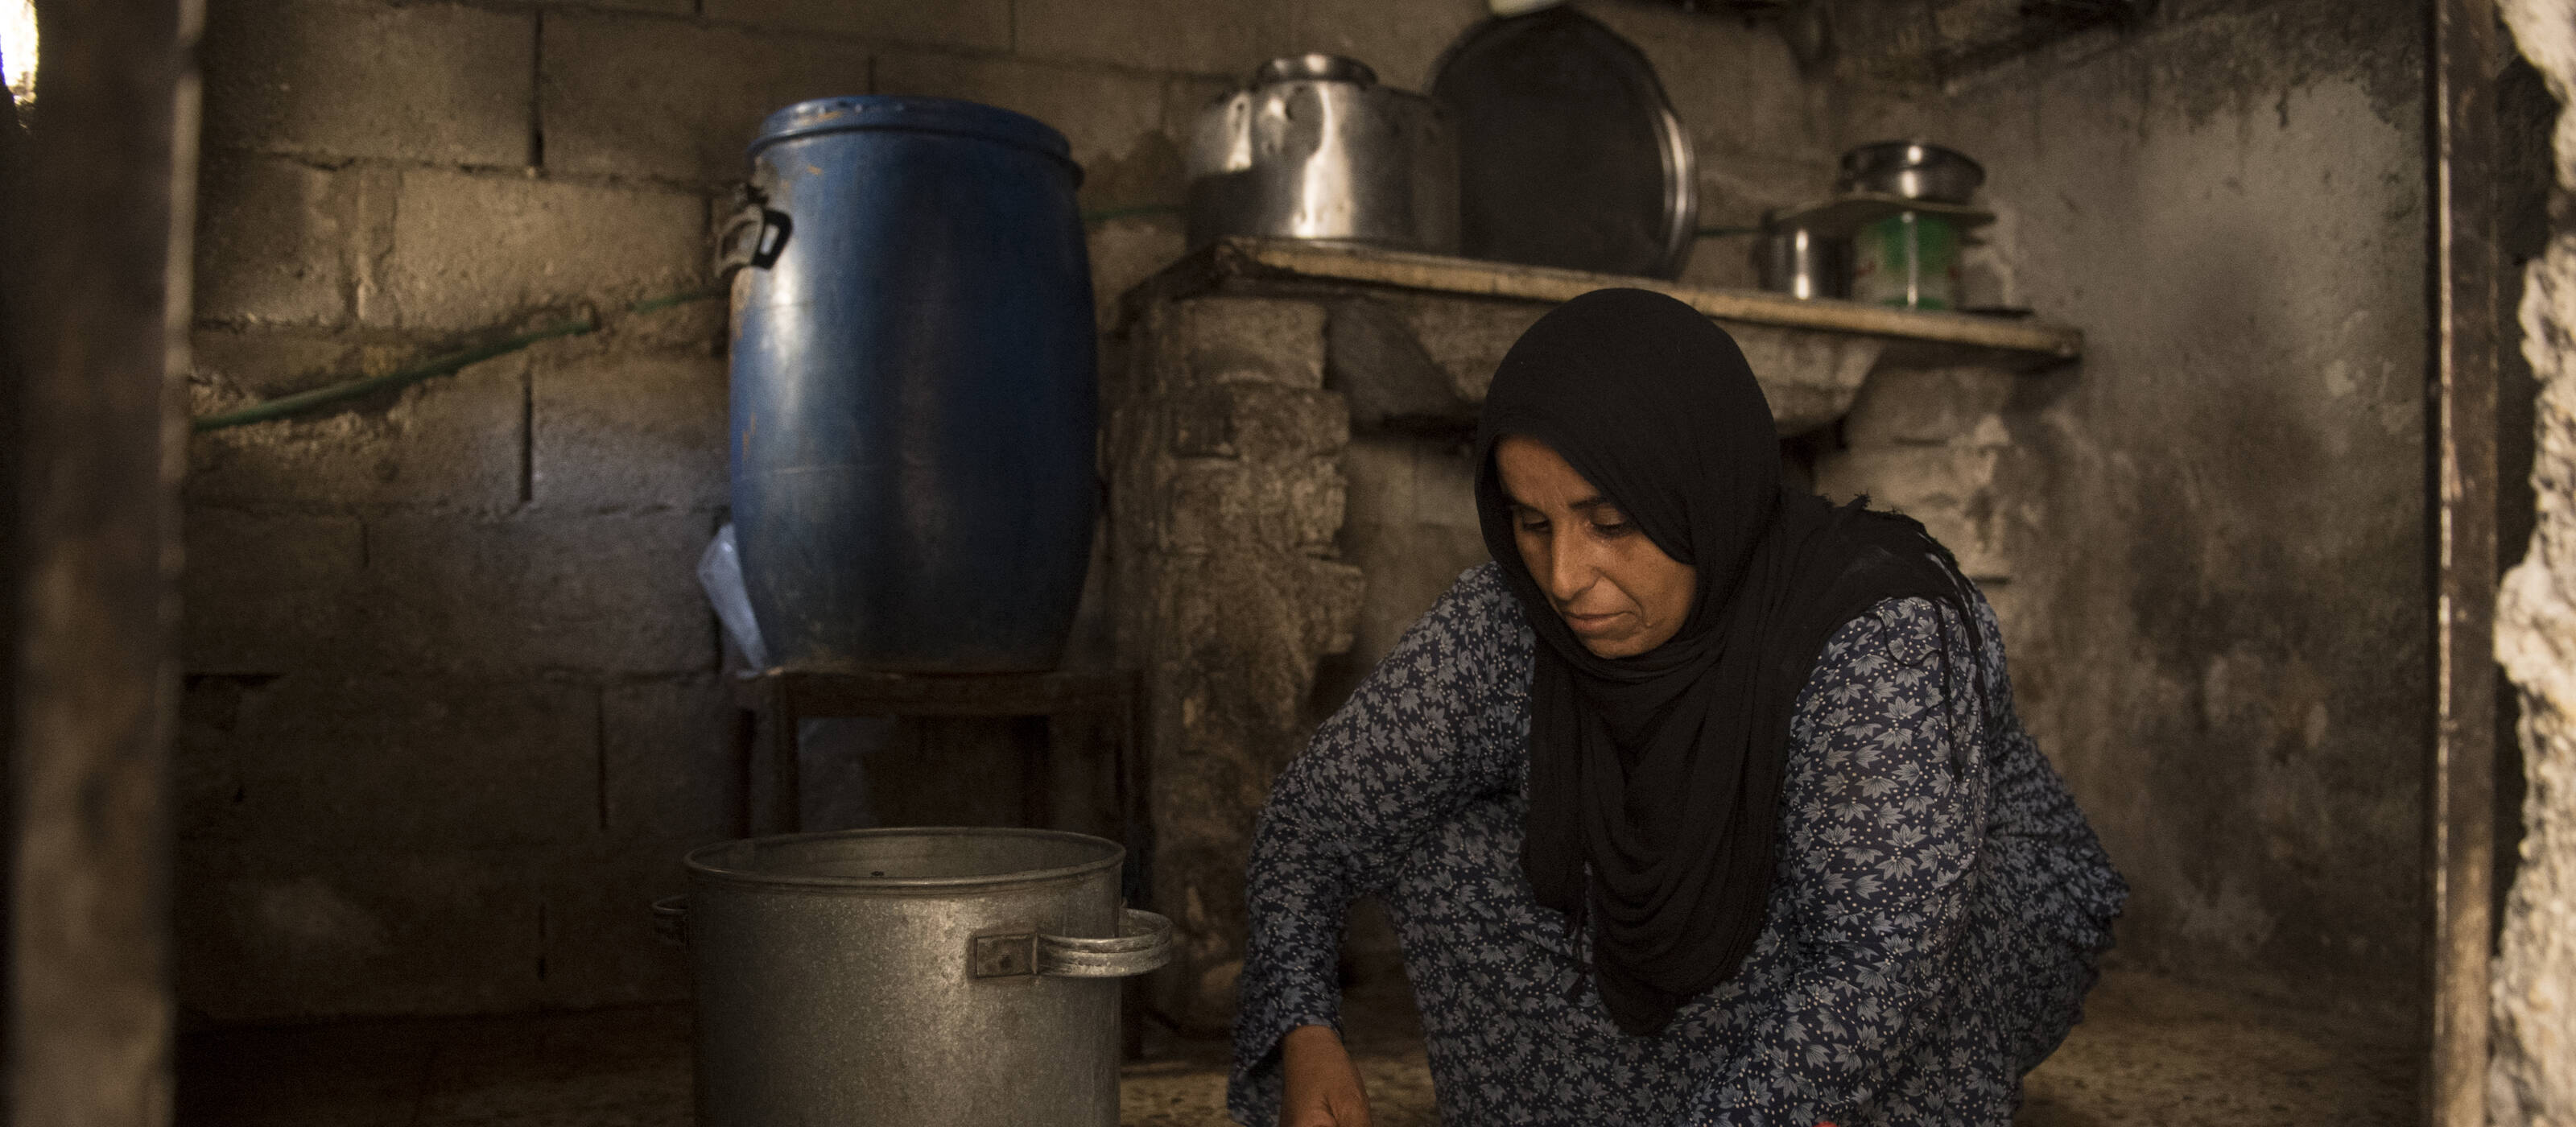 Khadije has 7 children. She fled the war with her husband and now lives in Jabal Bedro - Aleppo. Only one child, her 13-year-old daughter, goes to school. They are enrolled in the Caritas project and the girl will soon be attending the Caritas supplementary school.